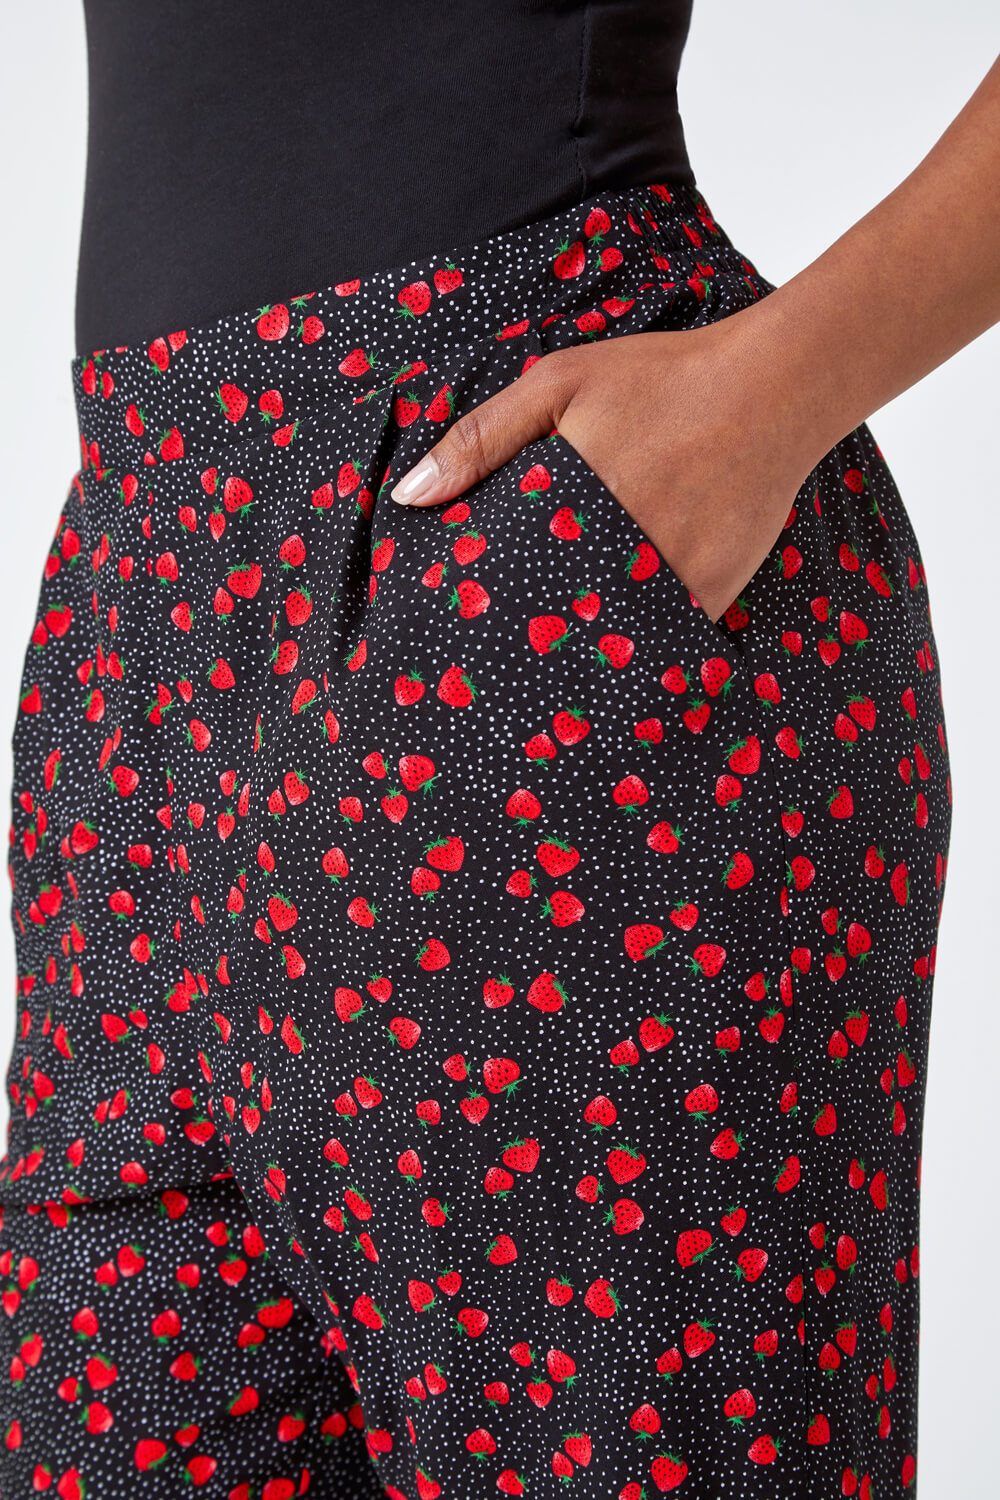 Black Petite Strawberry Tapered Stretch Trousers, Image 5 of 5